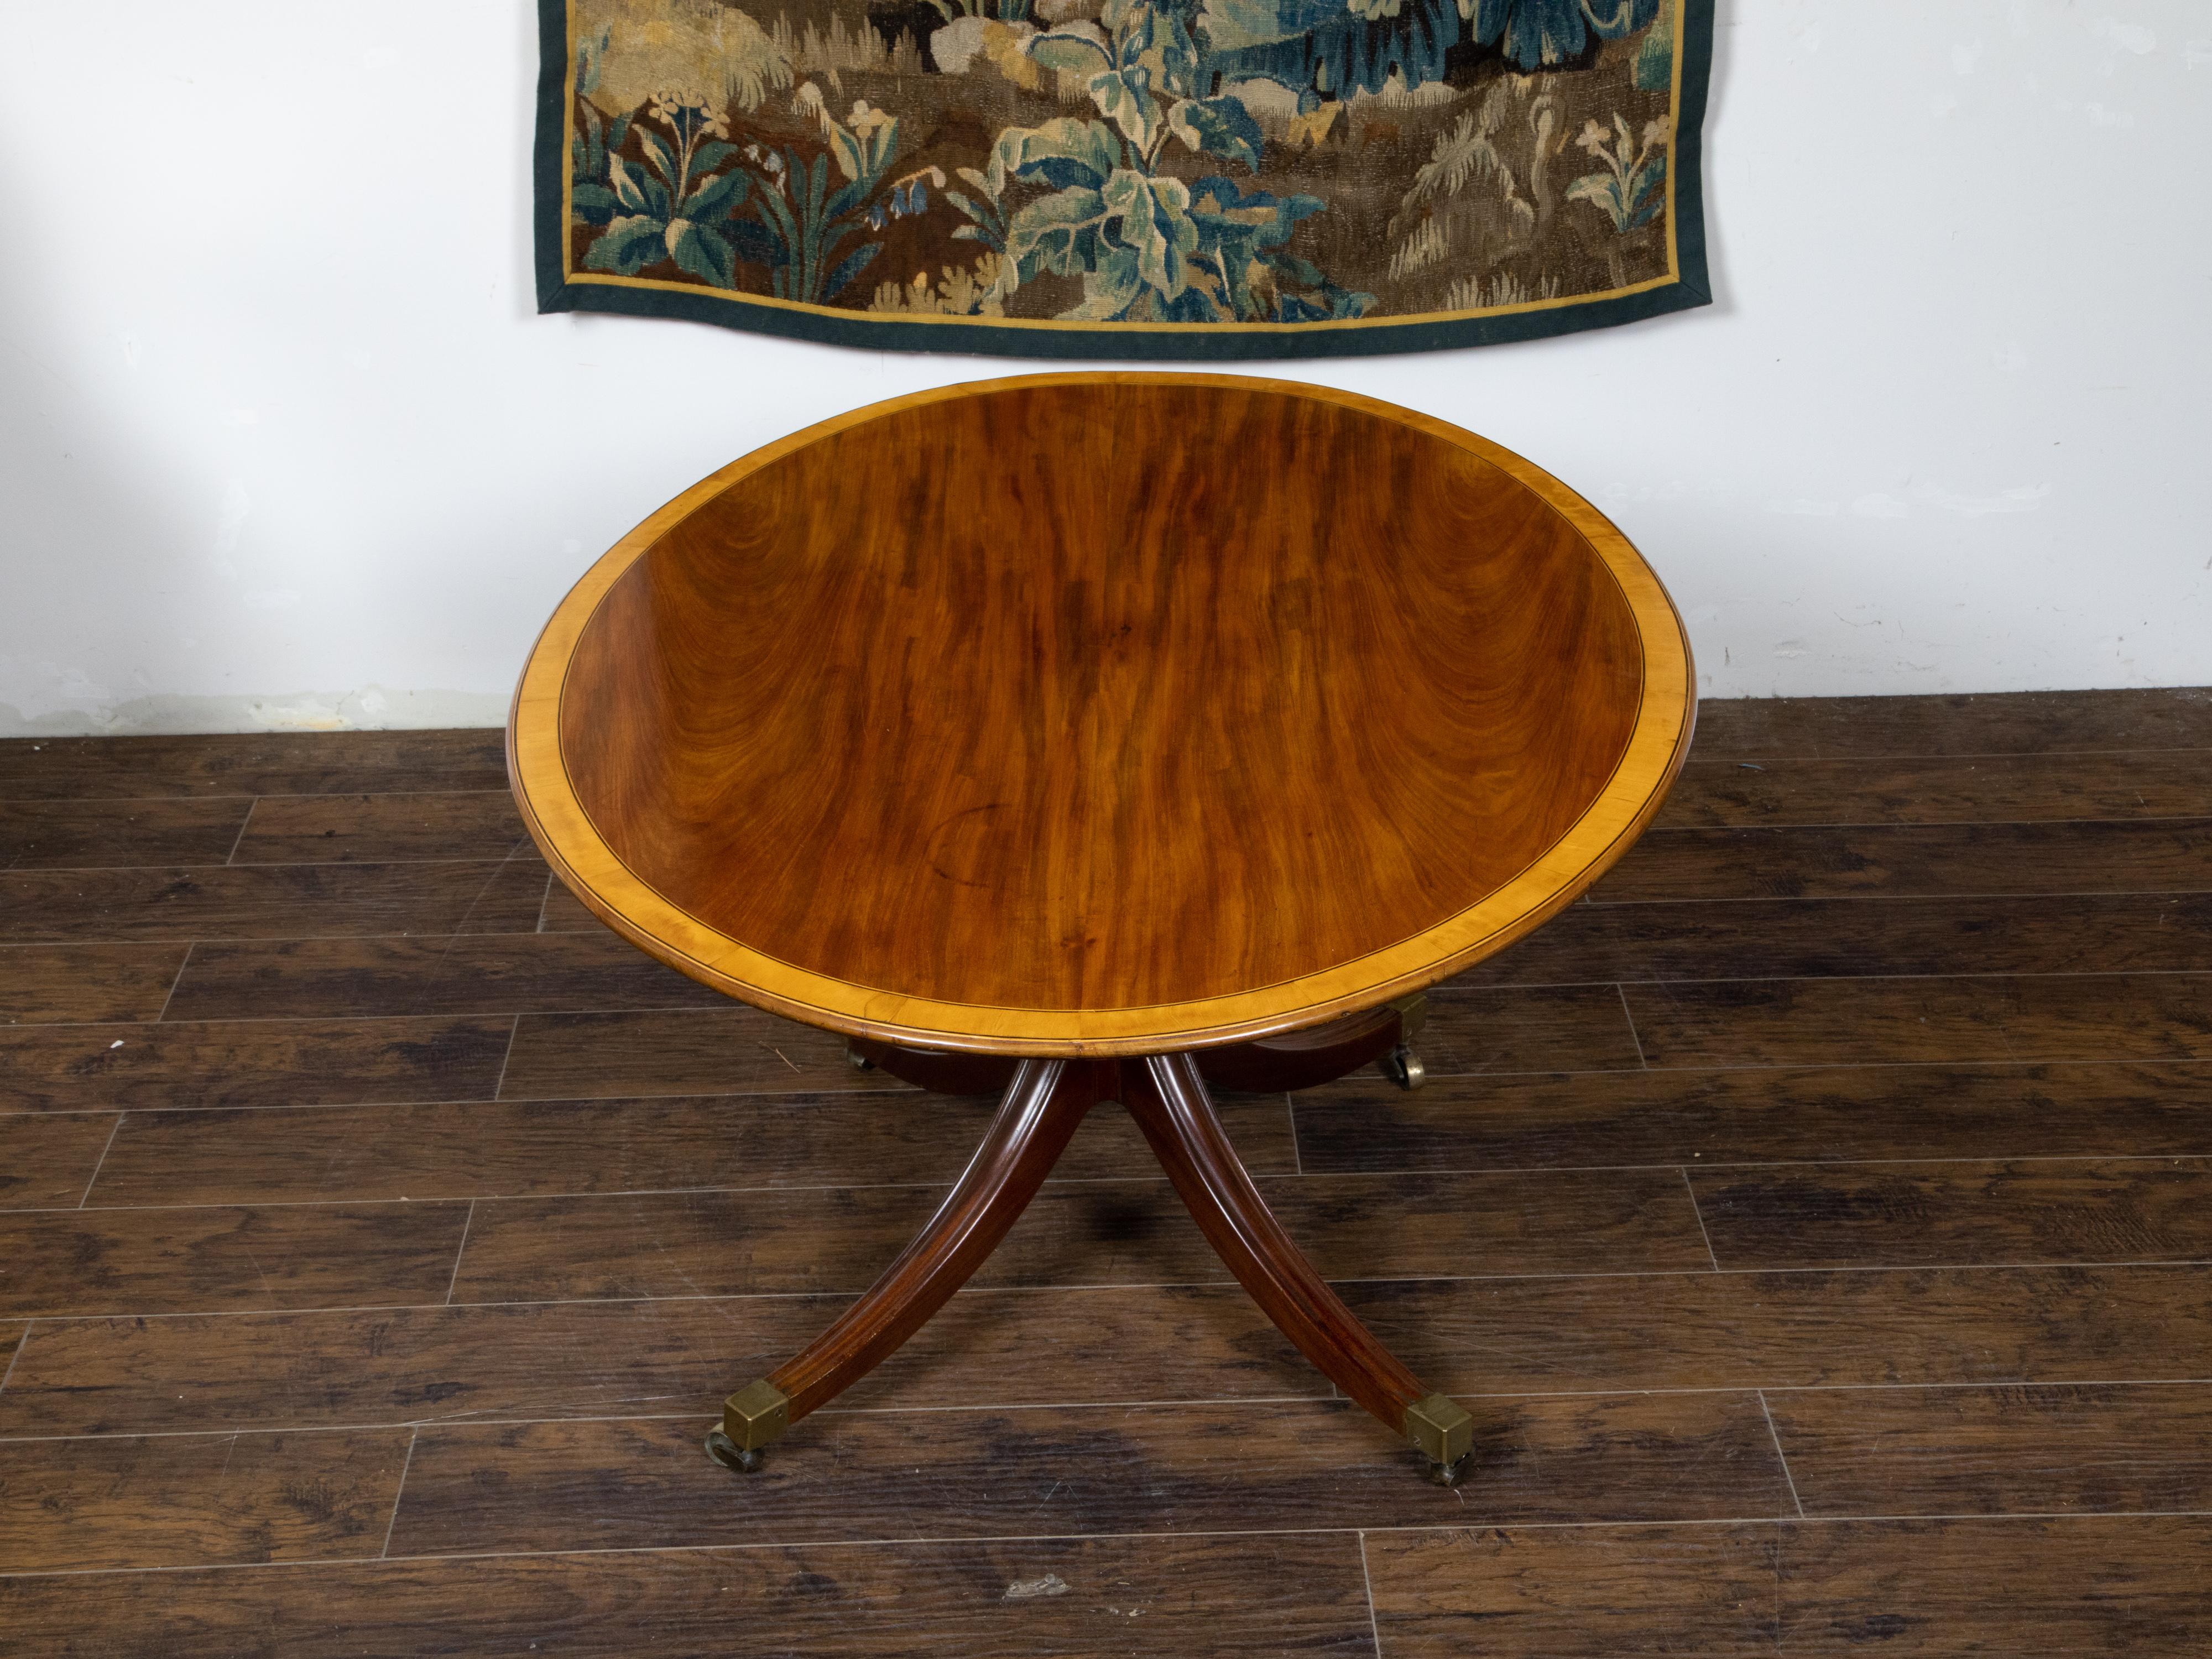 English Mahogany 1840s Oval Top Pedestal Table with Quadripod Base and Casters For Sale 1